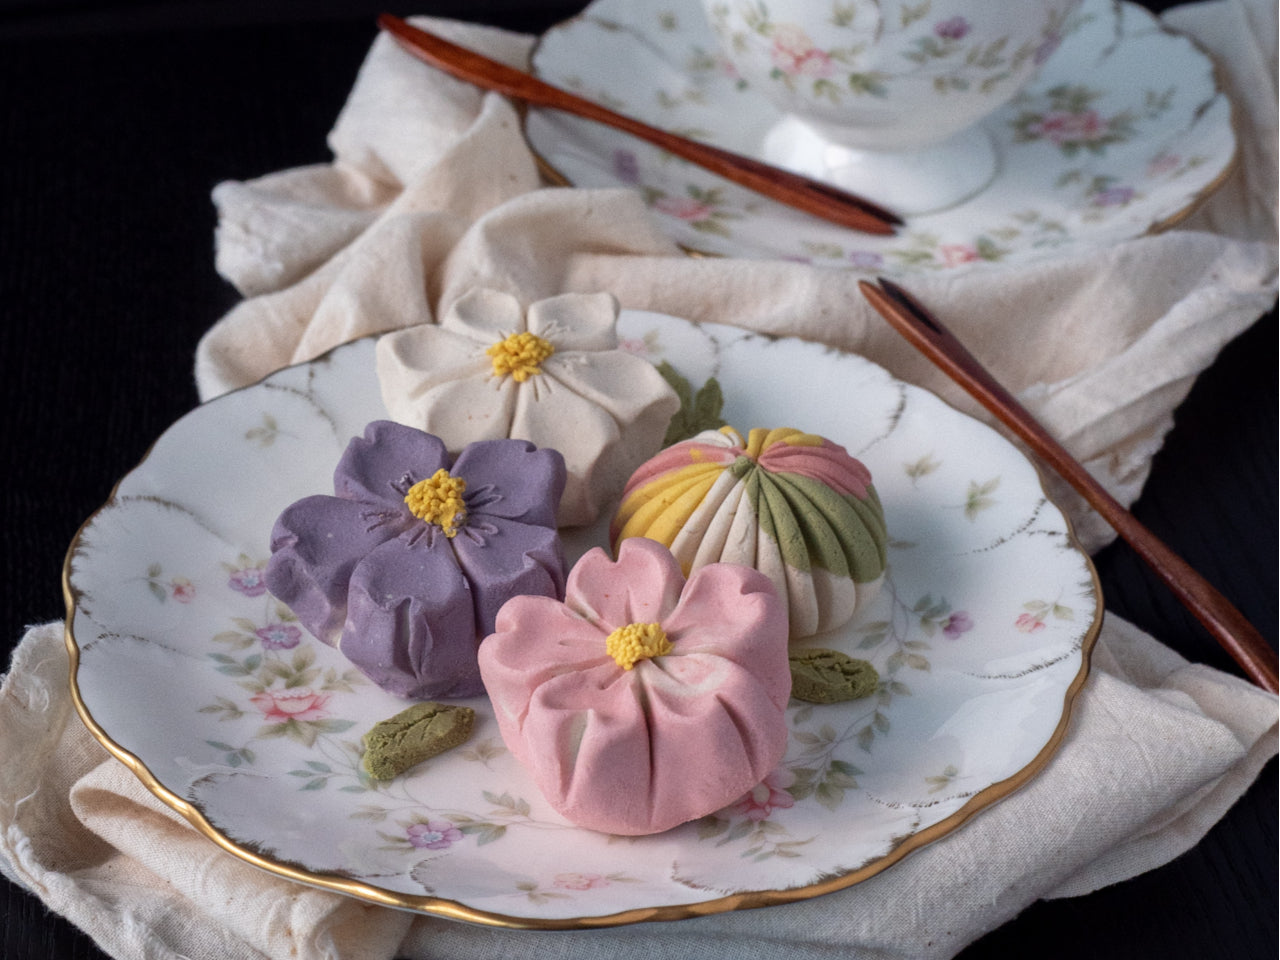 Wagashi: The Japanese Traditional Sweets